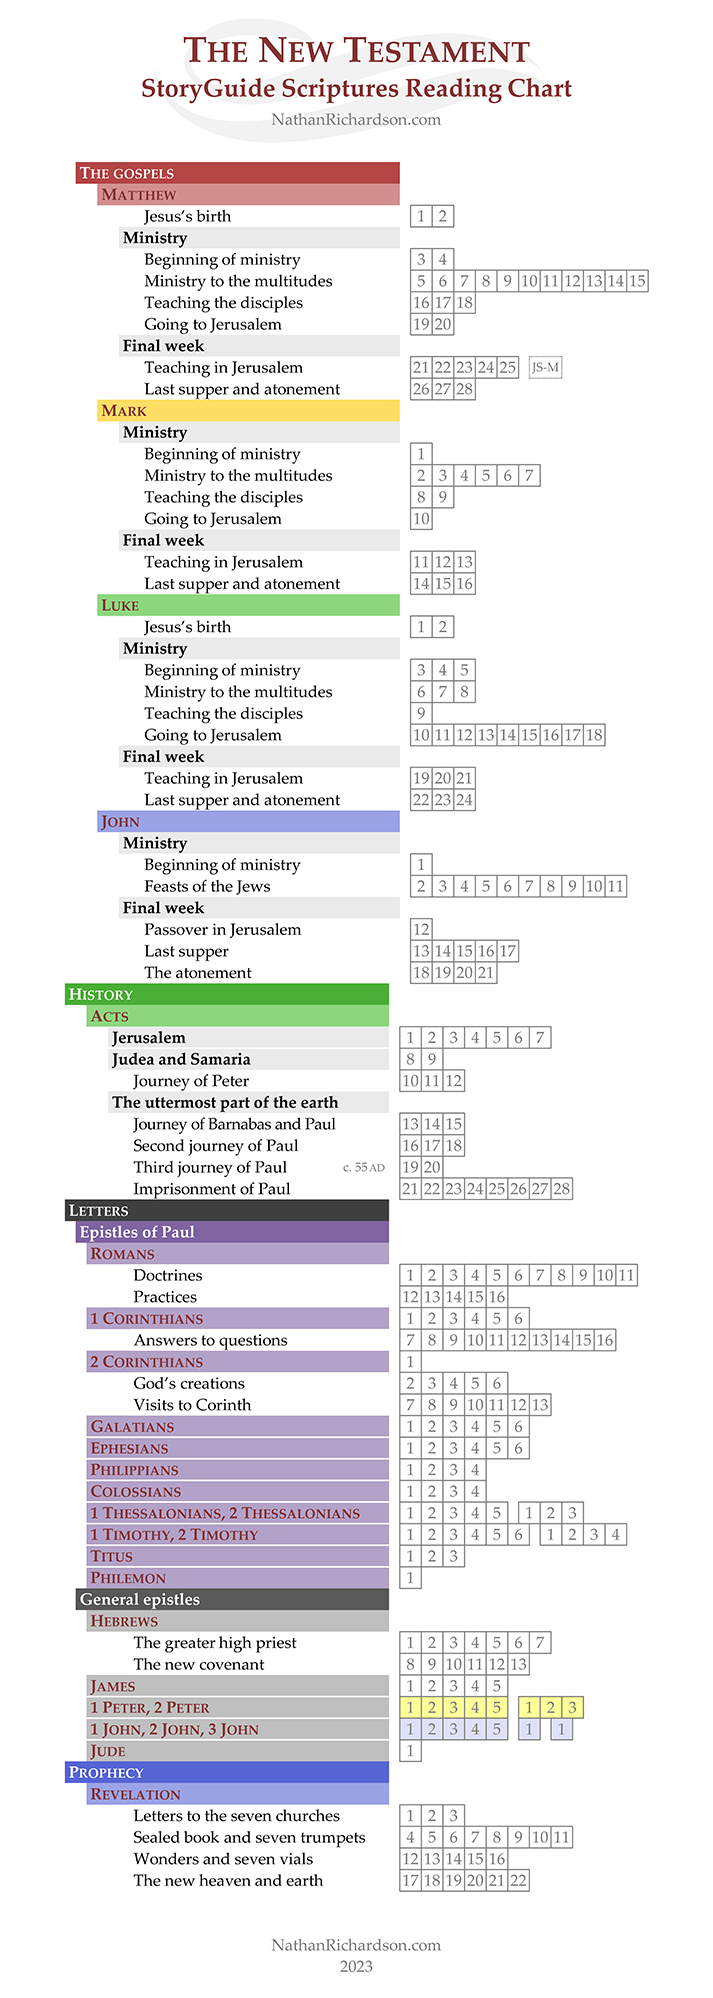 StoryGuide reading chart New Testament